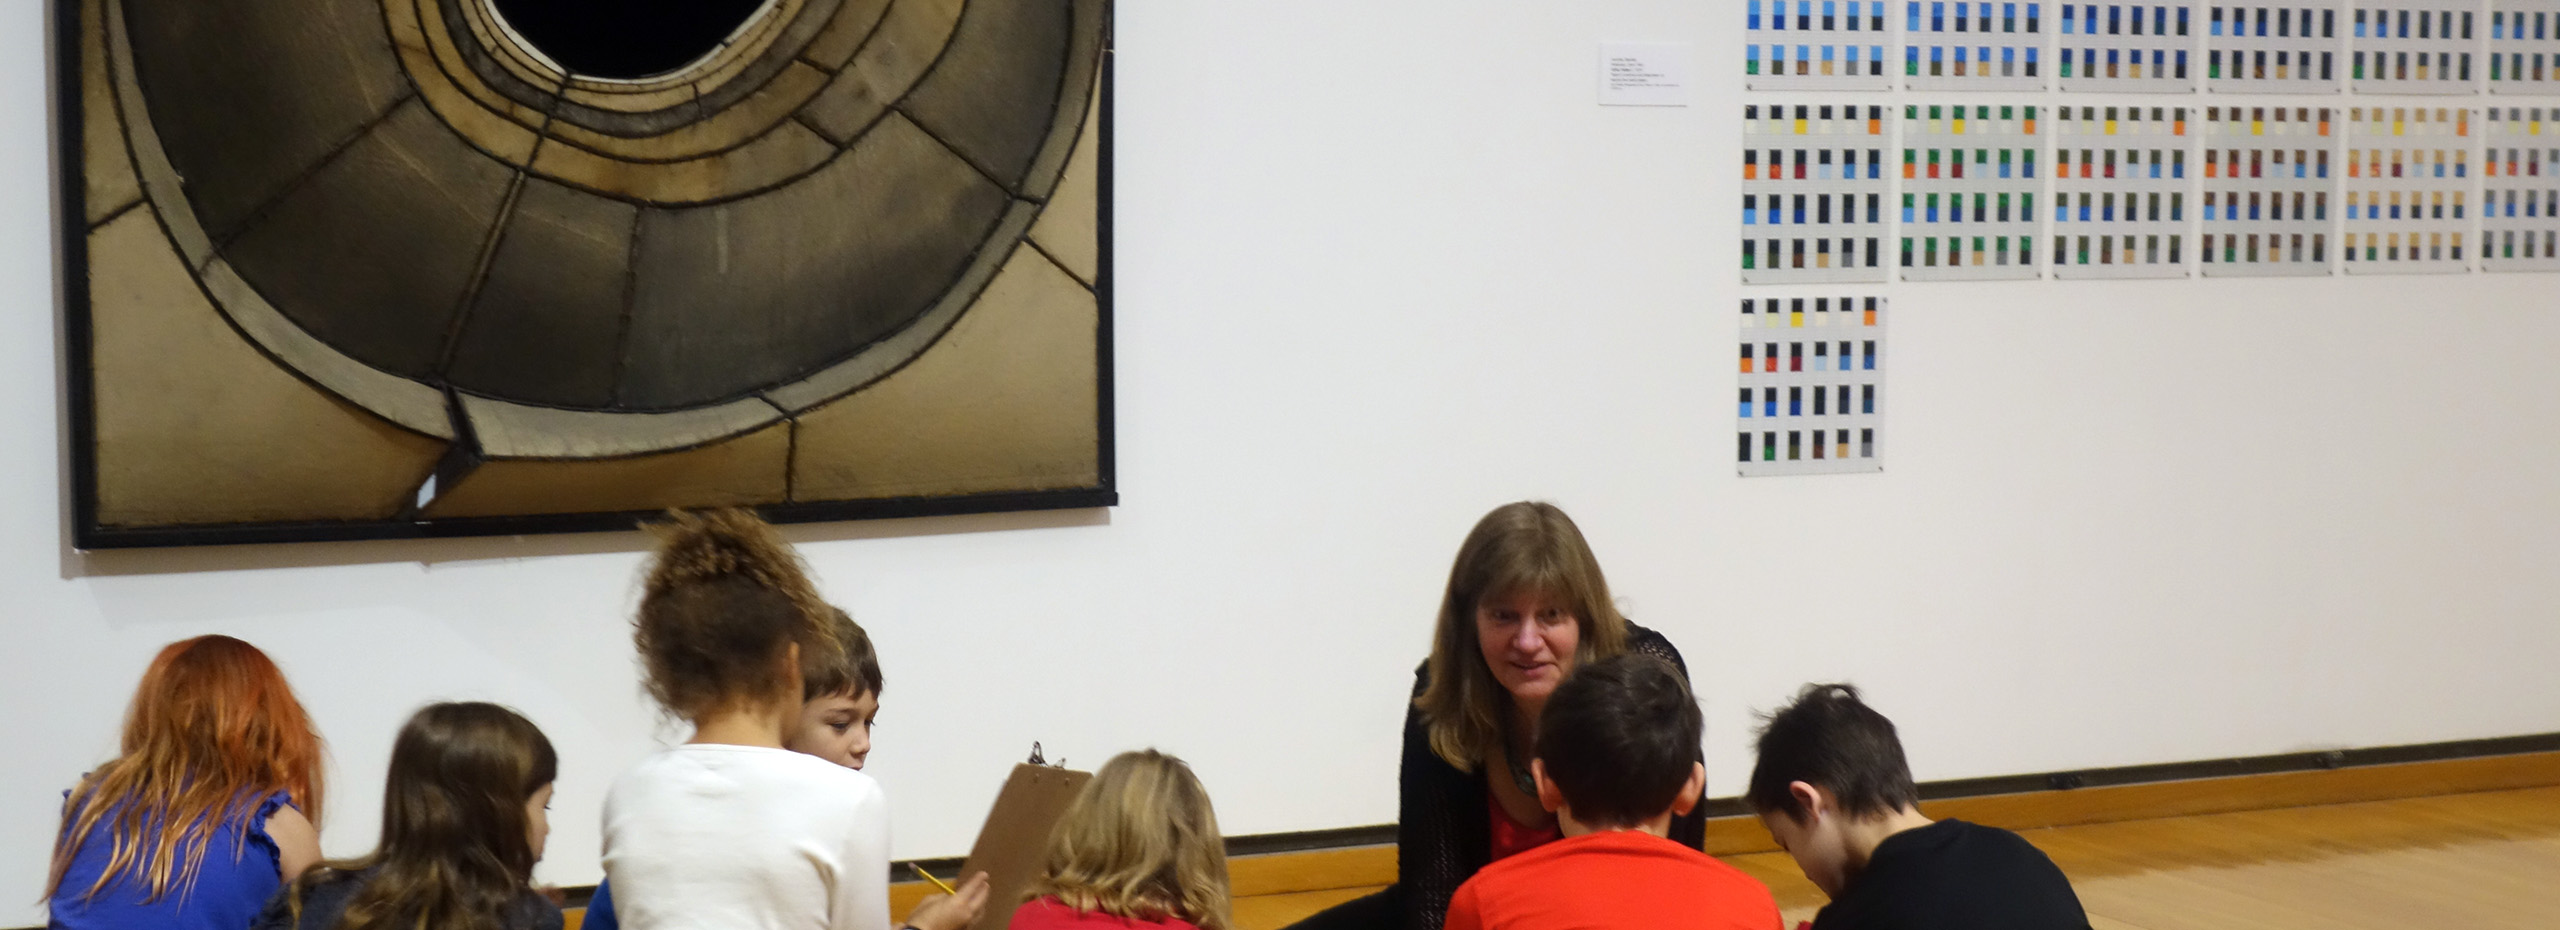 A woman teaches a group of young children in an art gallery